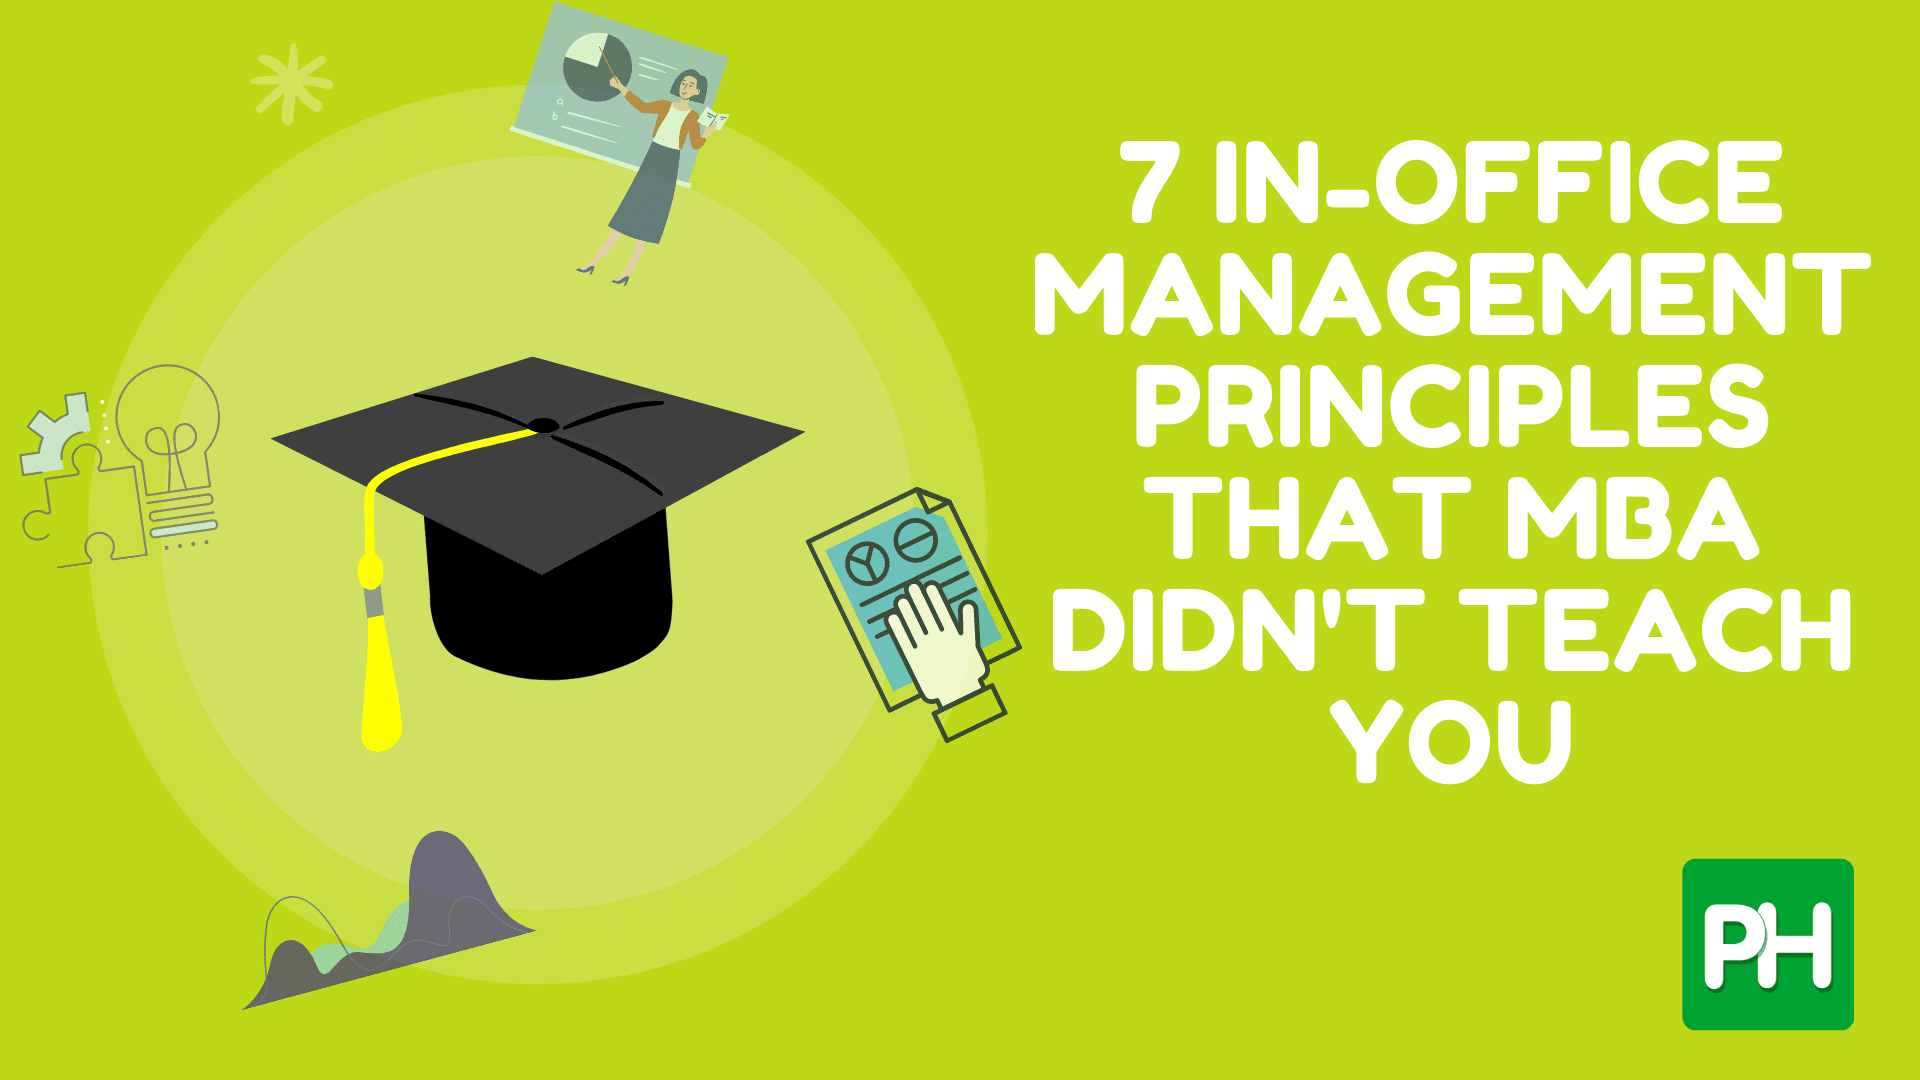 7 In-office Management Principles That MBA Didn’t Teach You